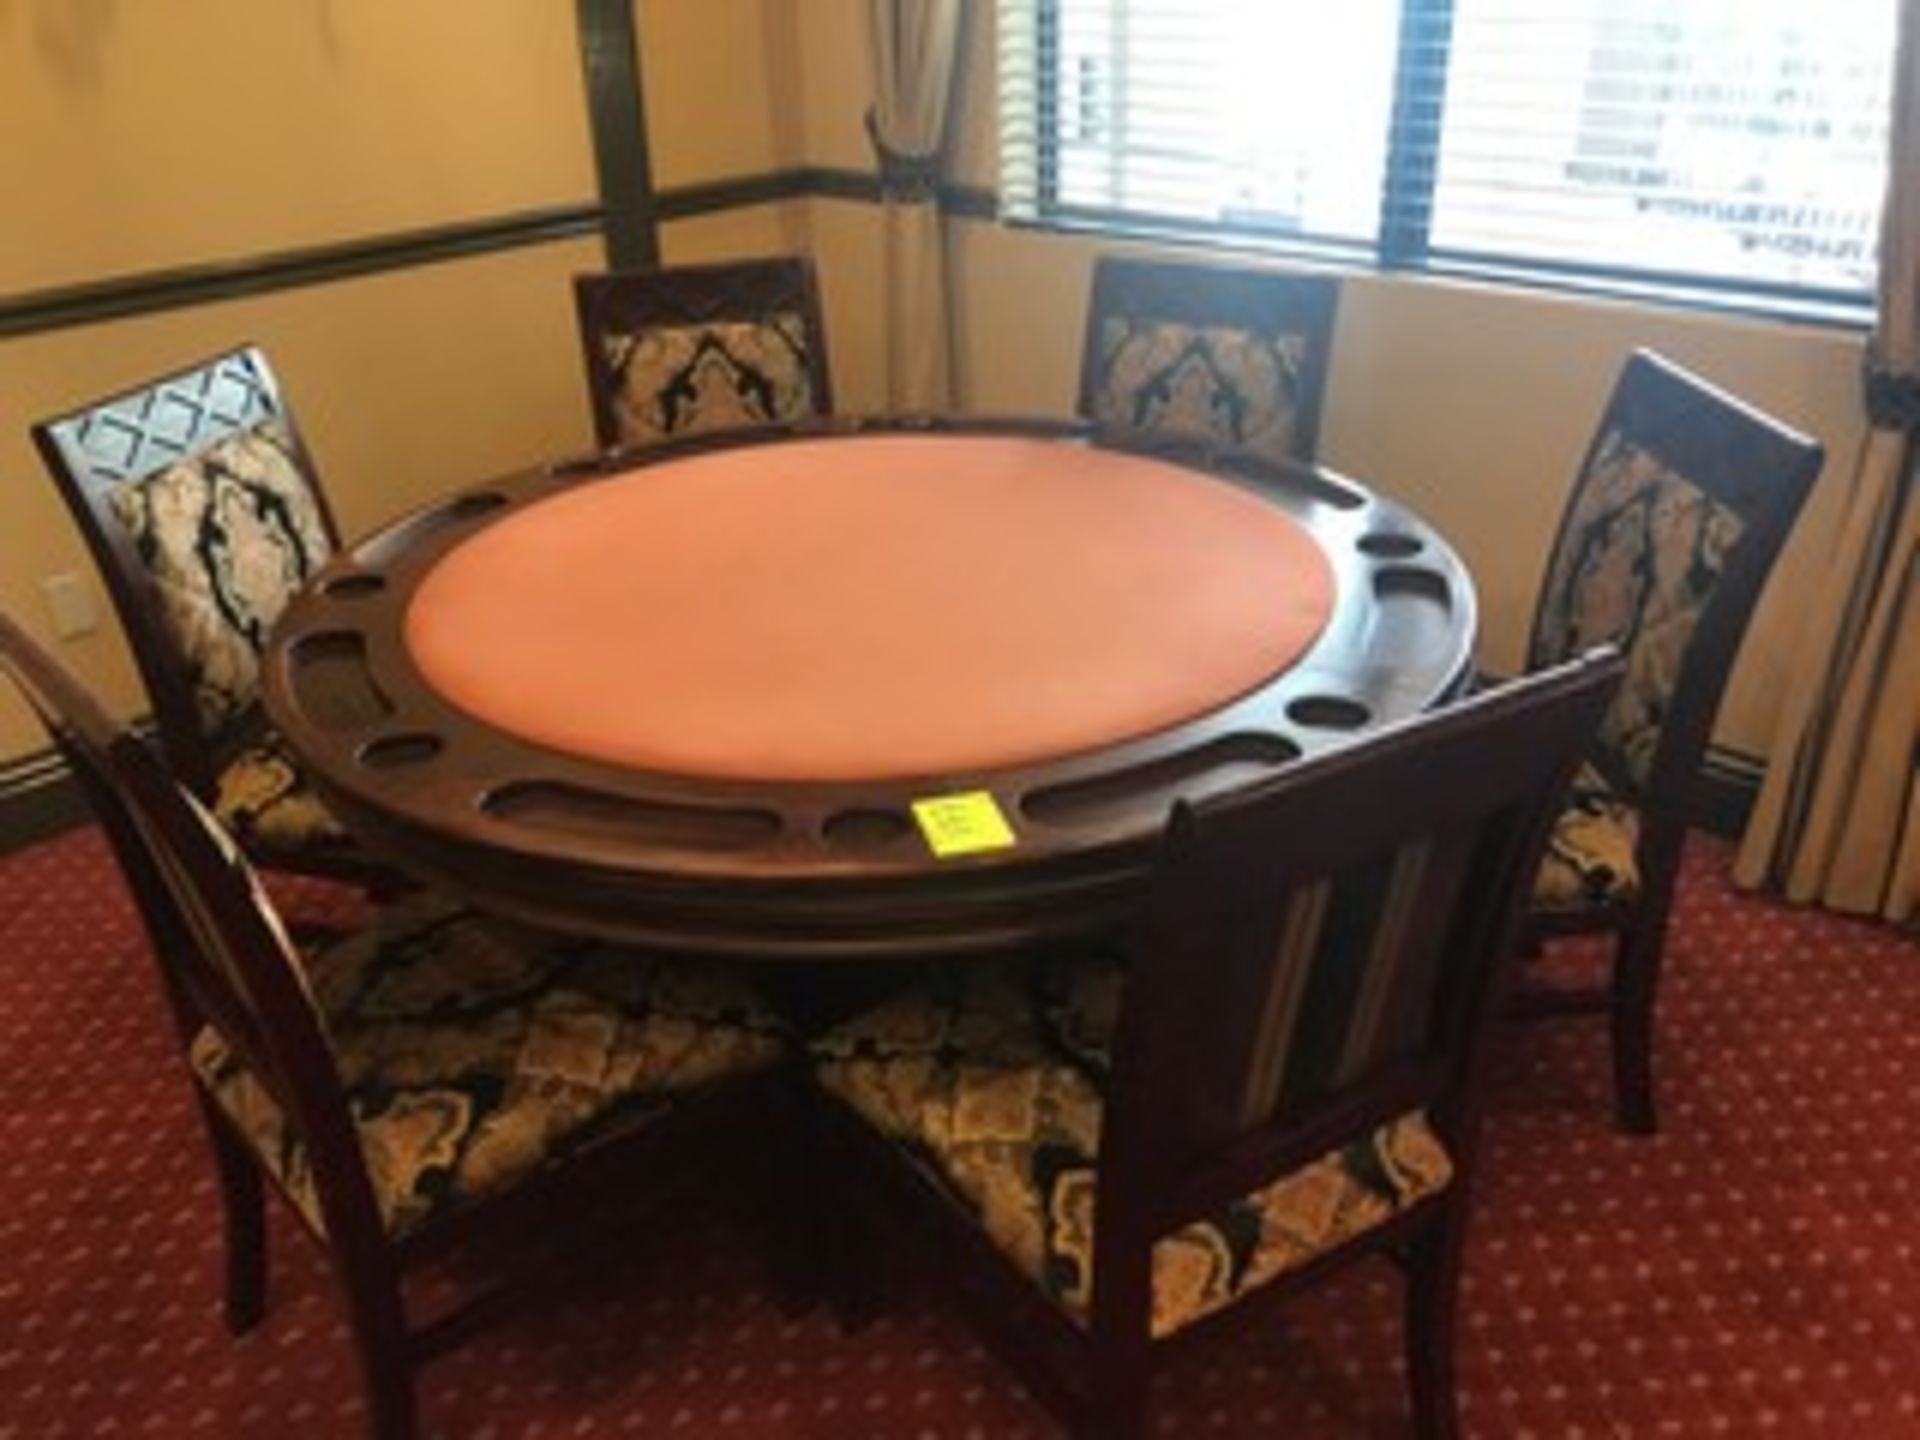 7-PIECE CARD TABLE SET - 1 TABLE / 6 CHAIRS - 60'' ROUND